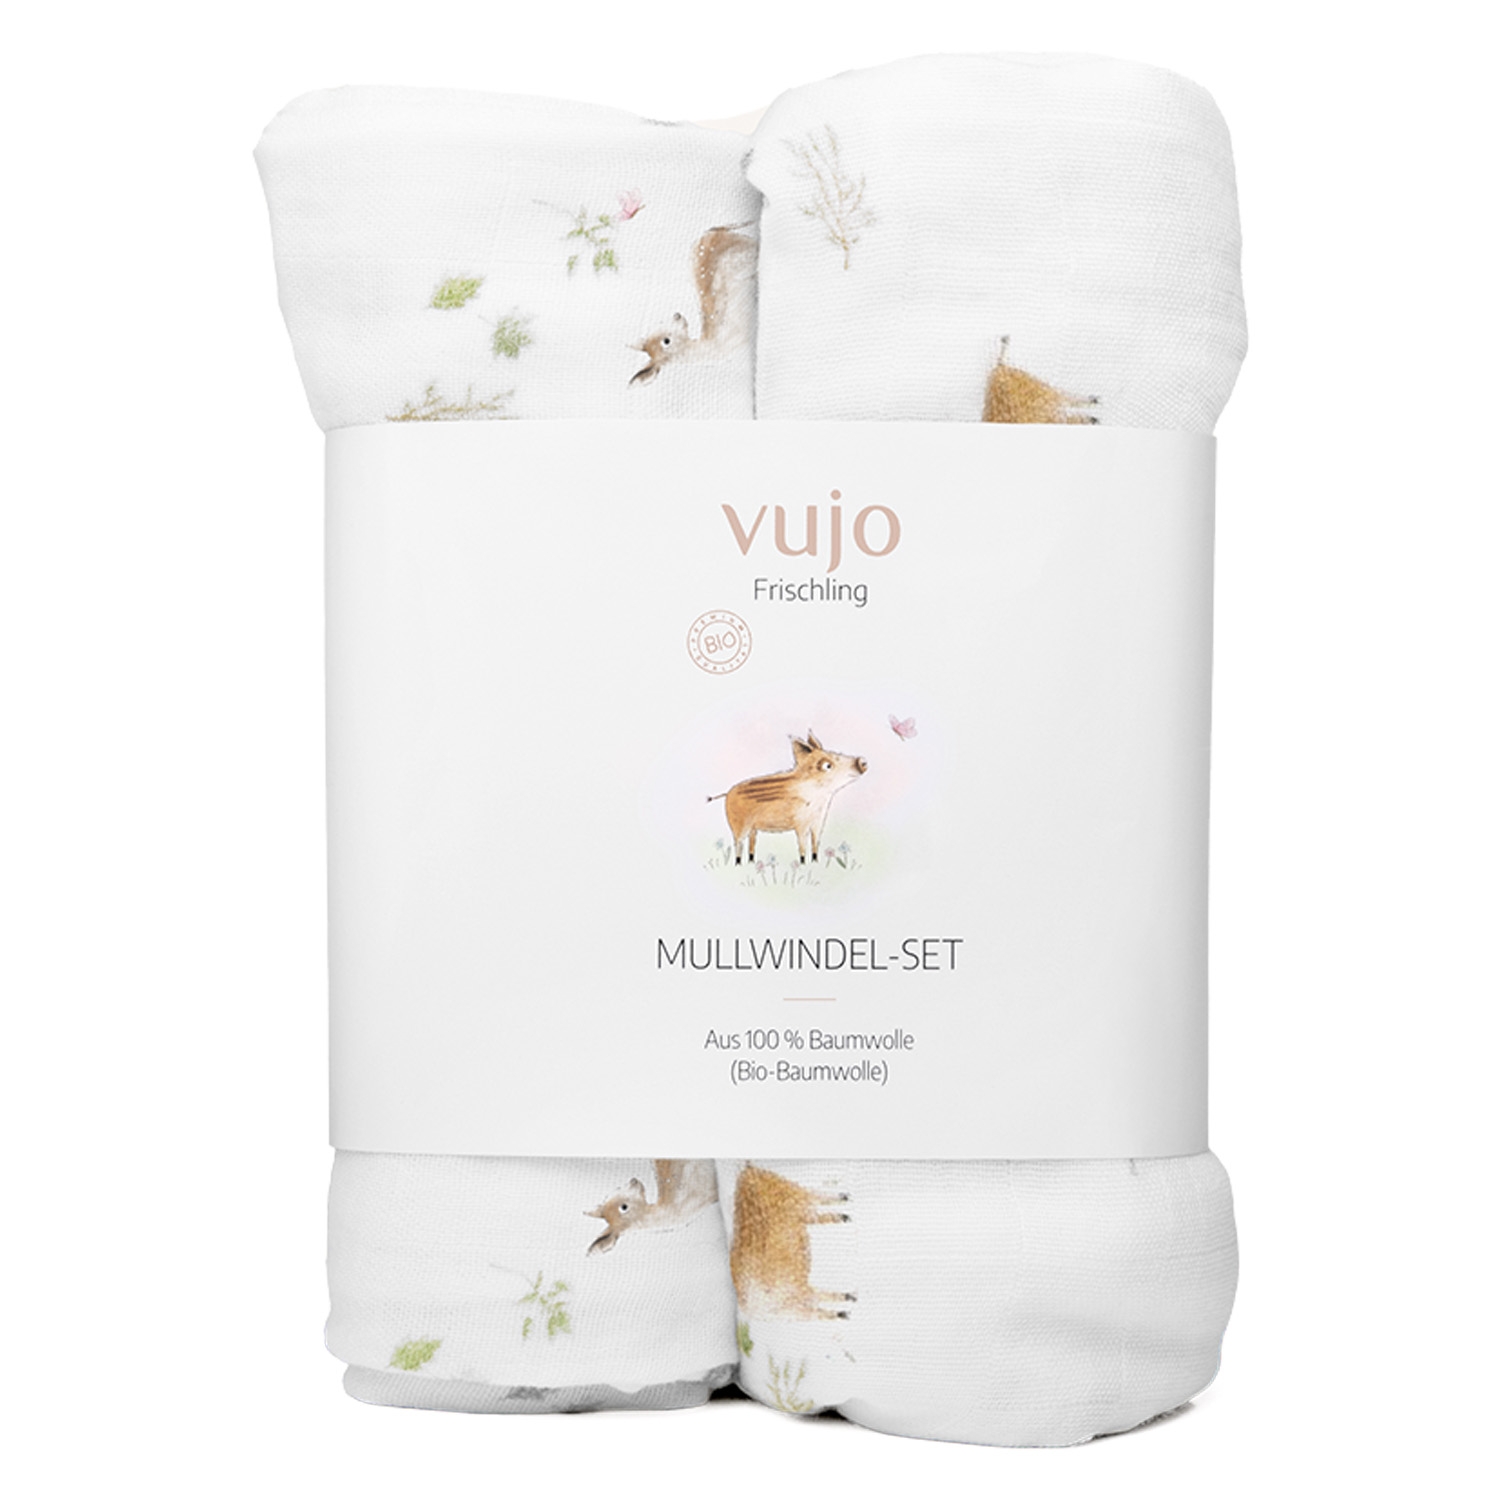 Product image from vujo Frischling - Baby Mullwindel-Set